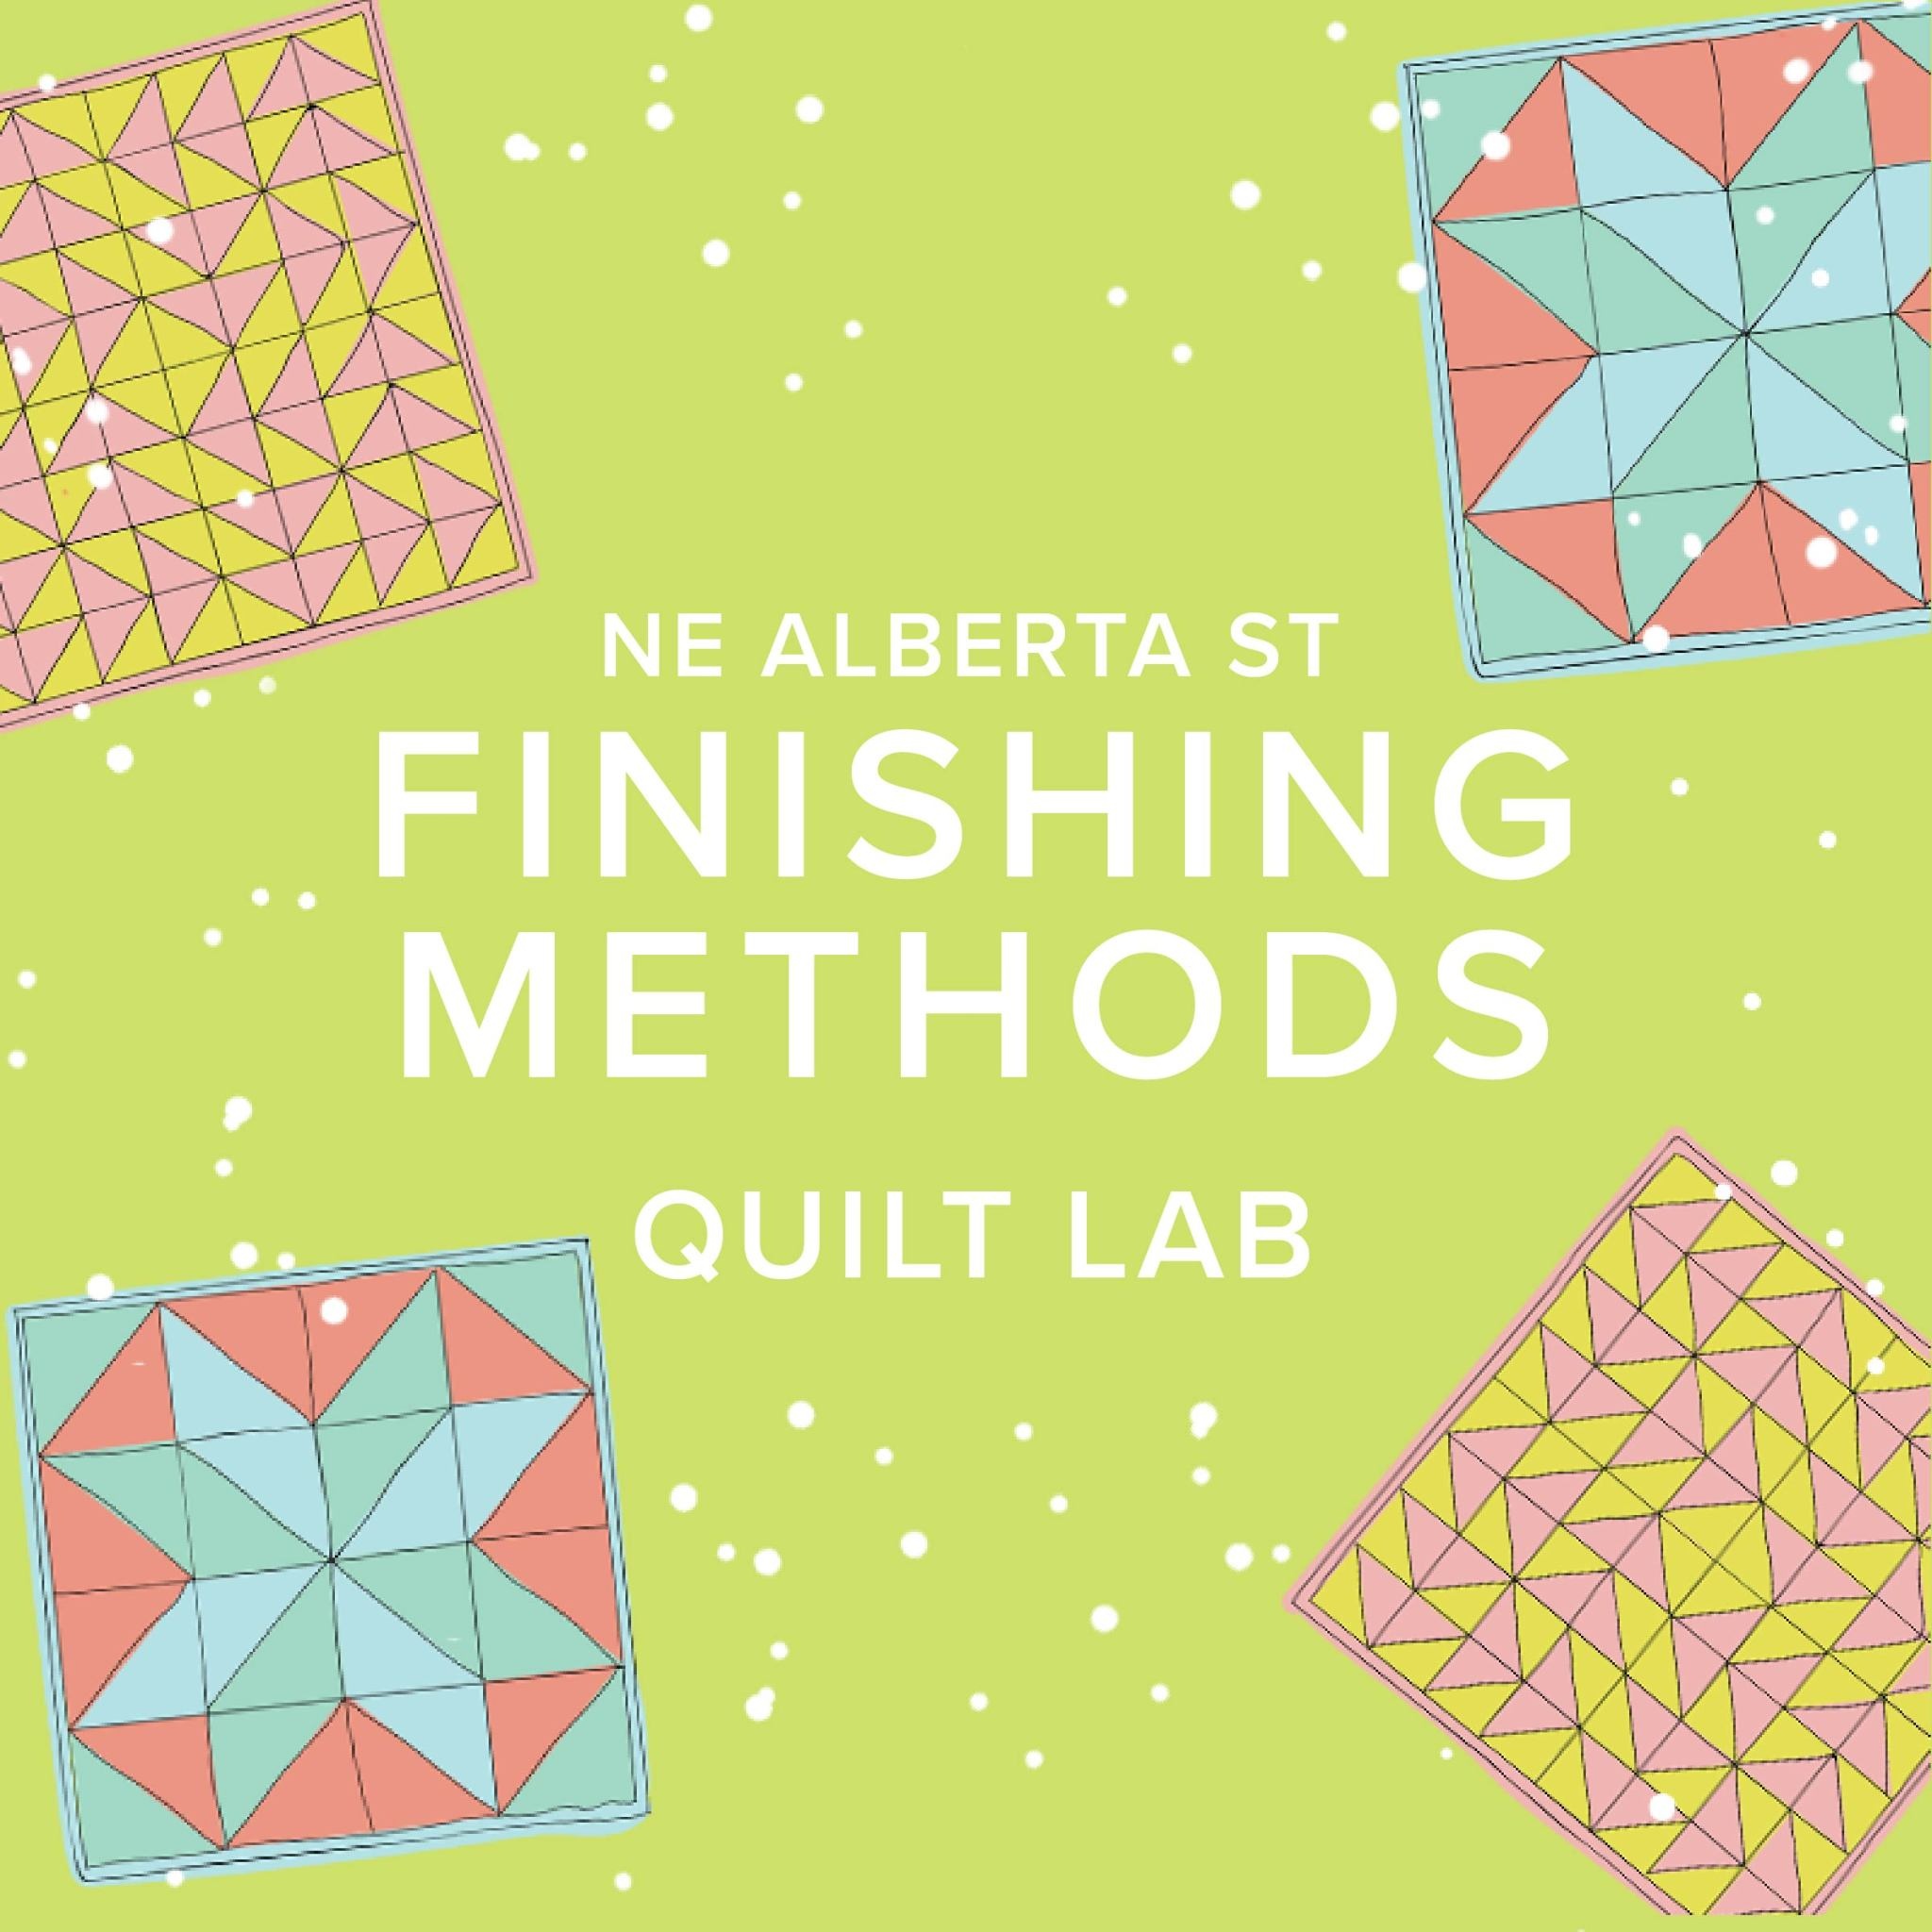 Chloe Costello LAB IN SESSION Quilt Lab: Finishing Methods, Alberta Store, Thursdays, September 14th, 21st, & 28th, 5pm-7:30pm